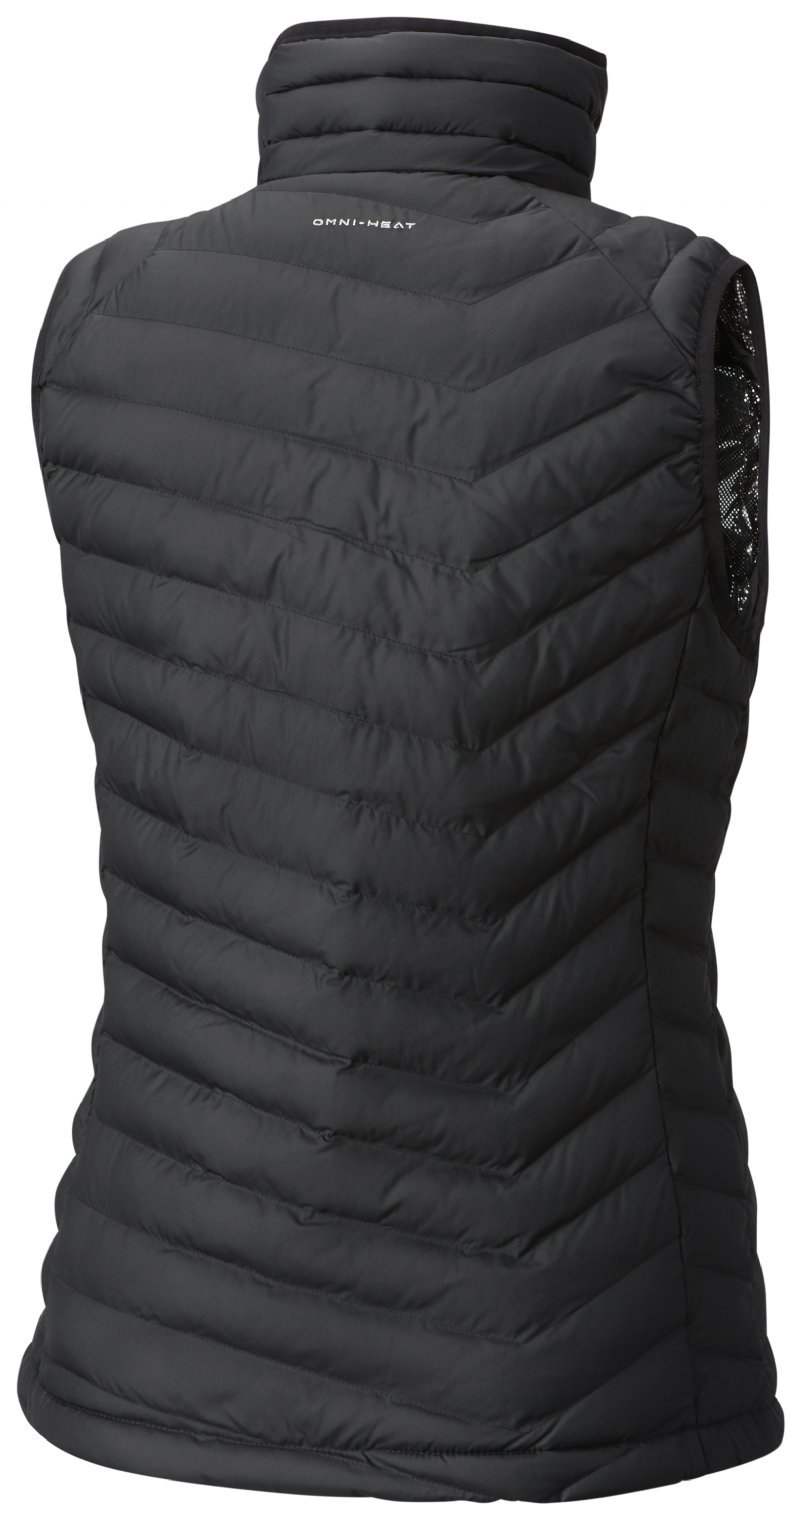 Columbia Women's Powder Lite Vest - The Luxury Promotional Gifts Company Limited